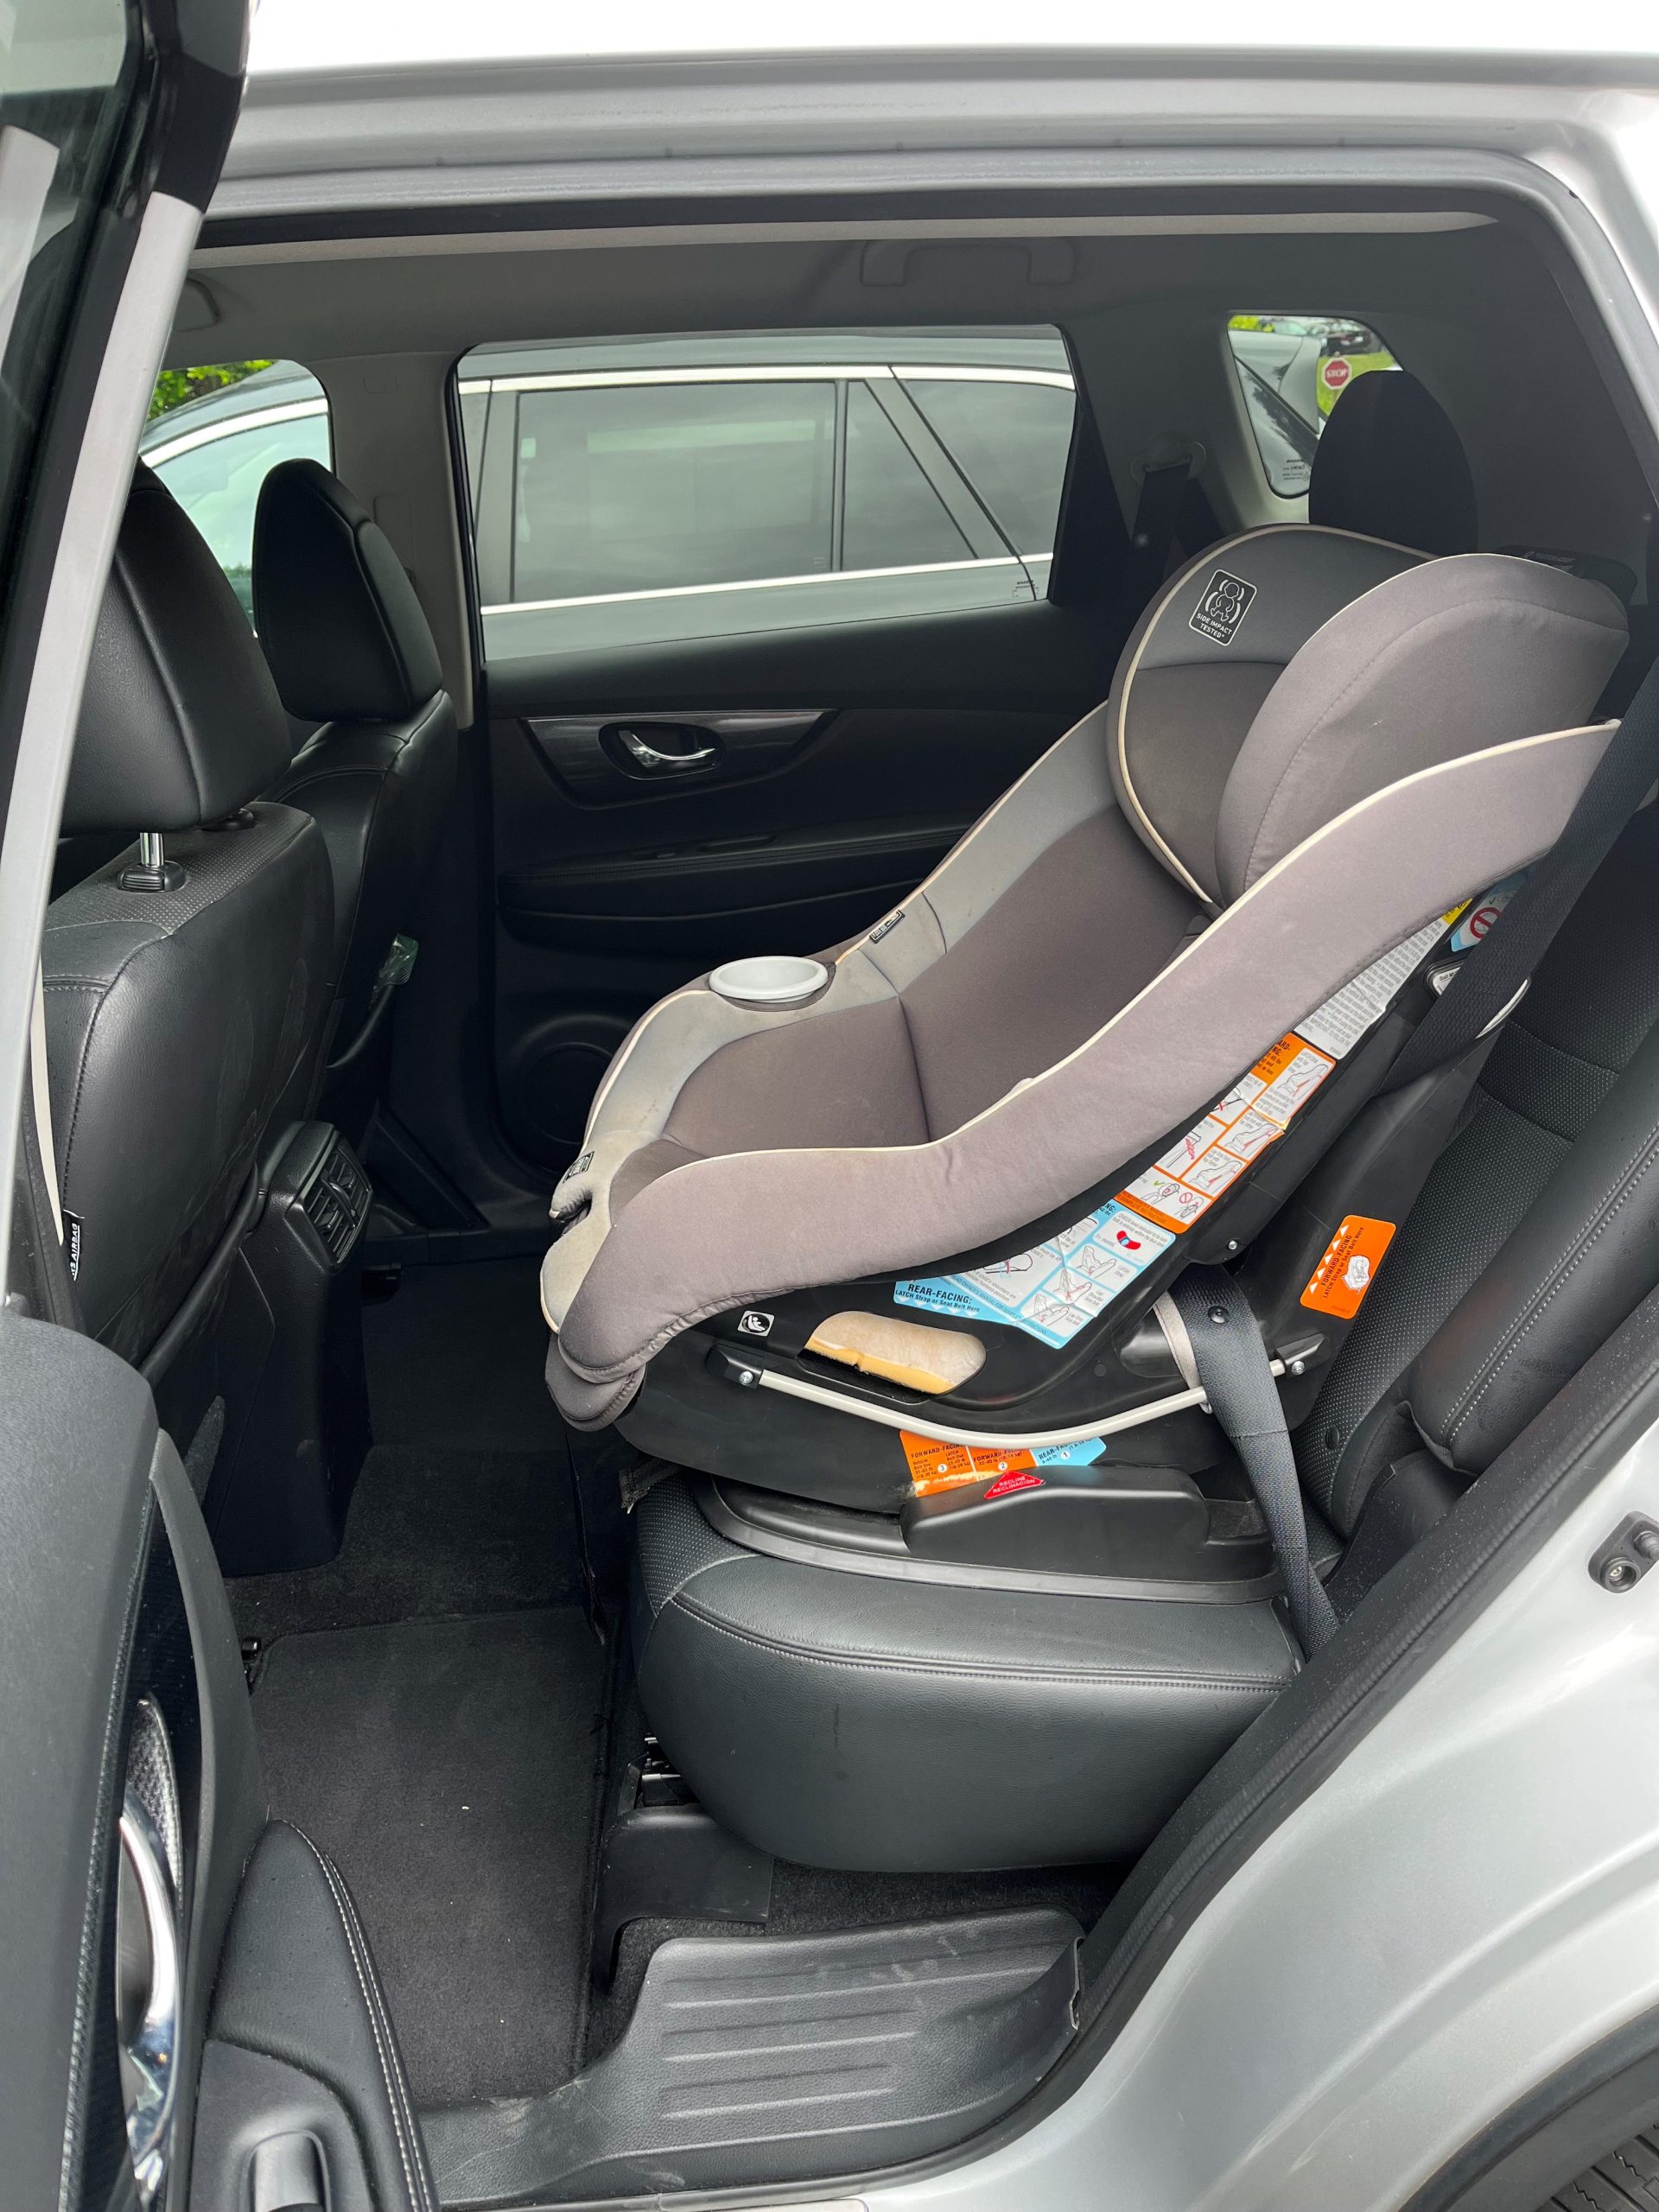 Car Accessories for Traveling with Kids